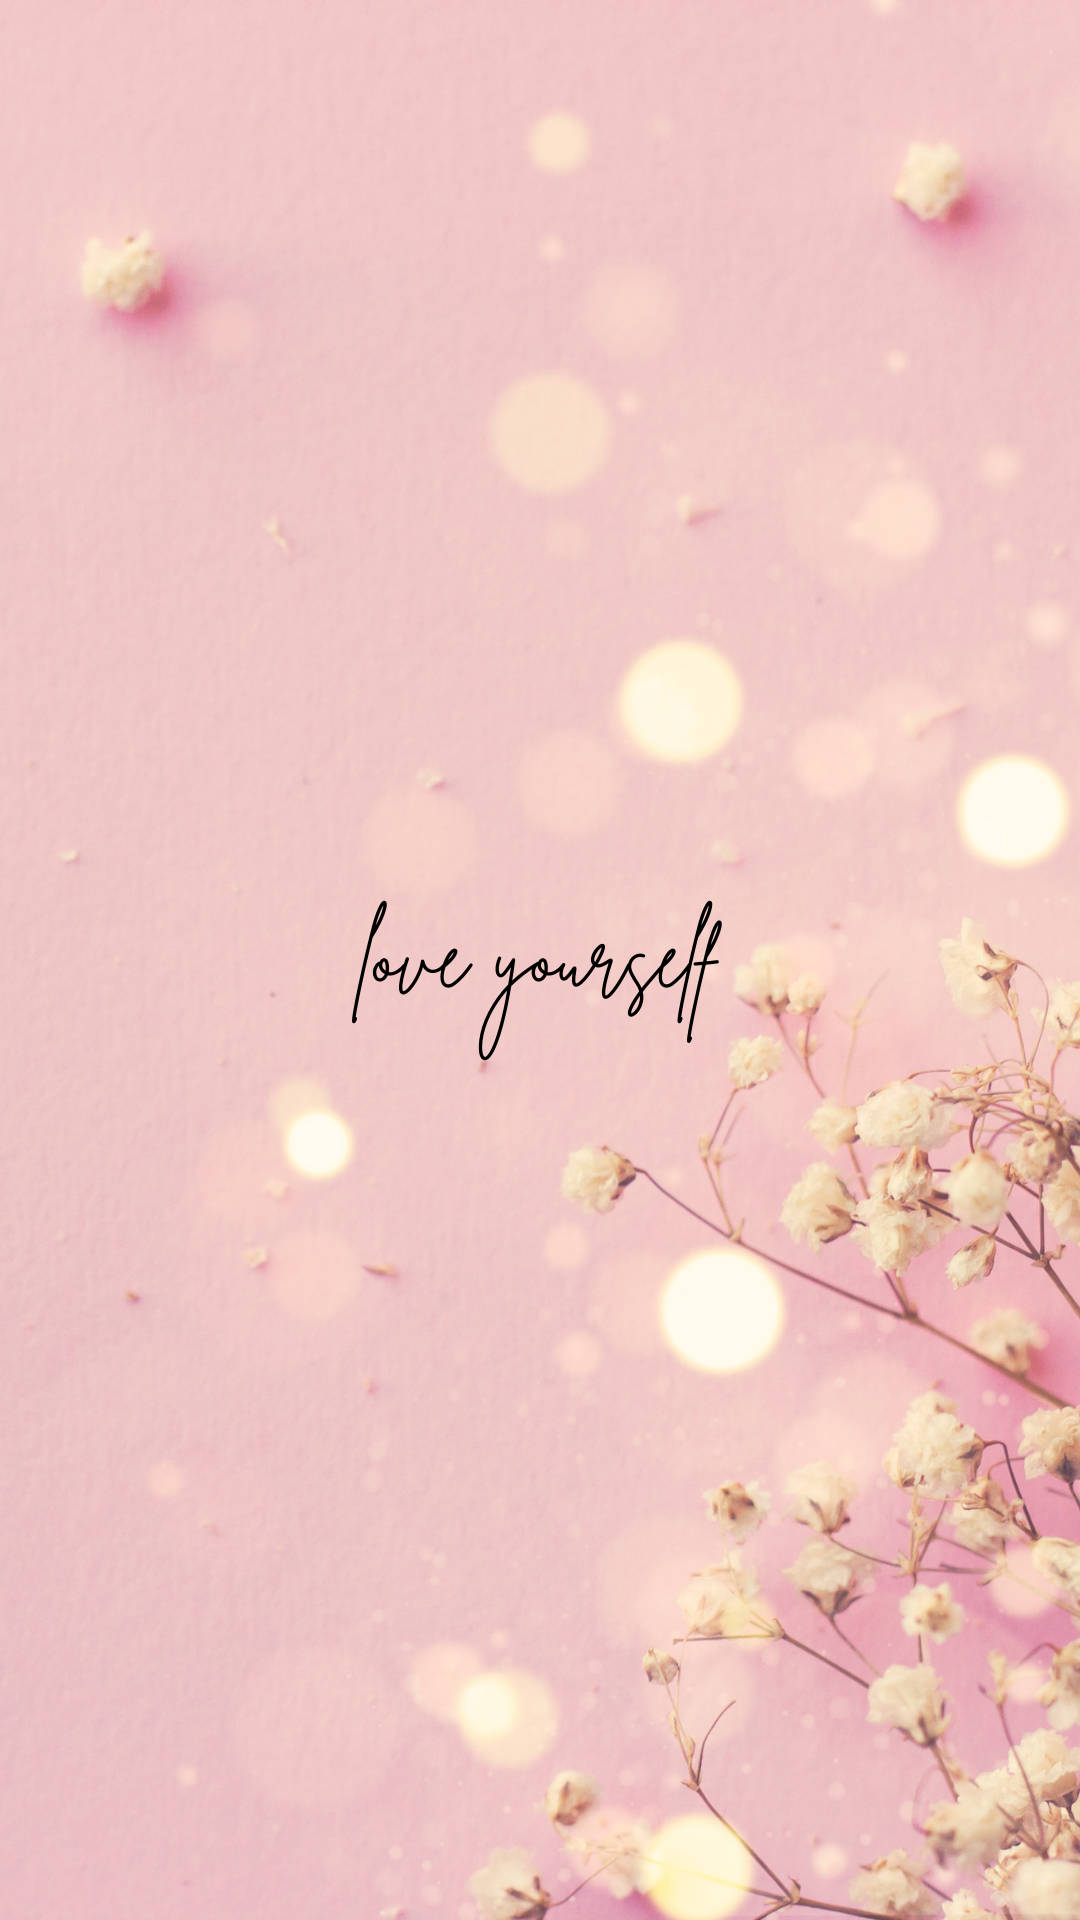 Shimmering Love Yourself Cute Positive Quotes